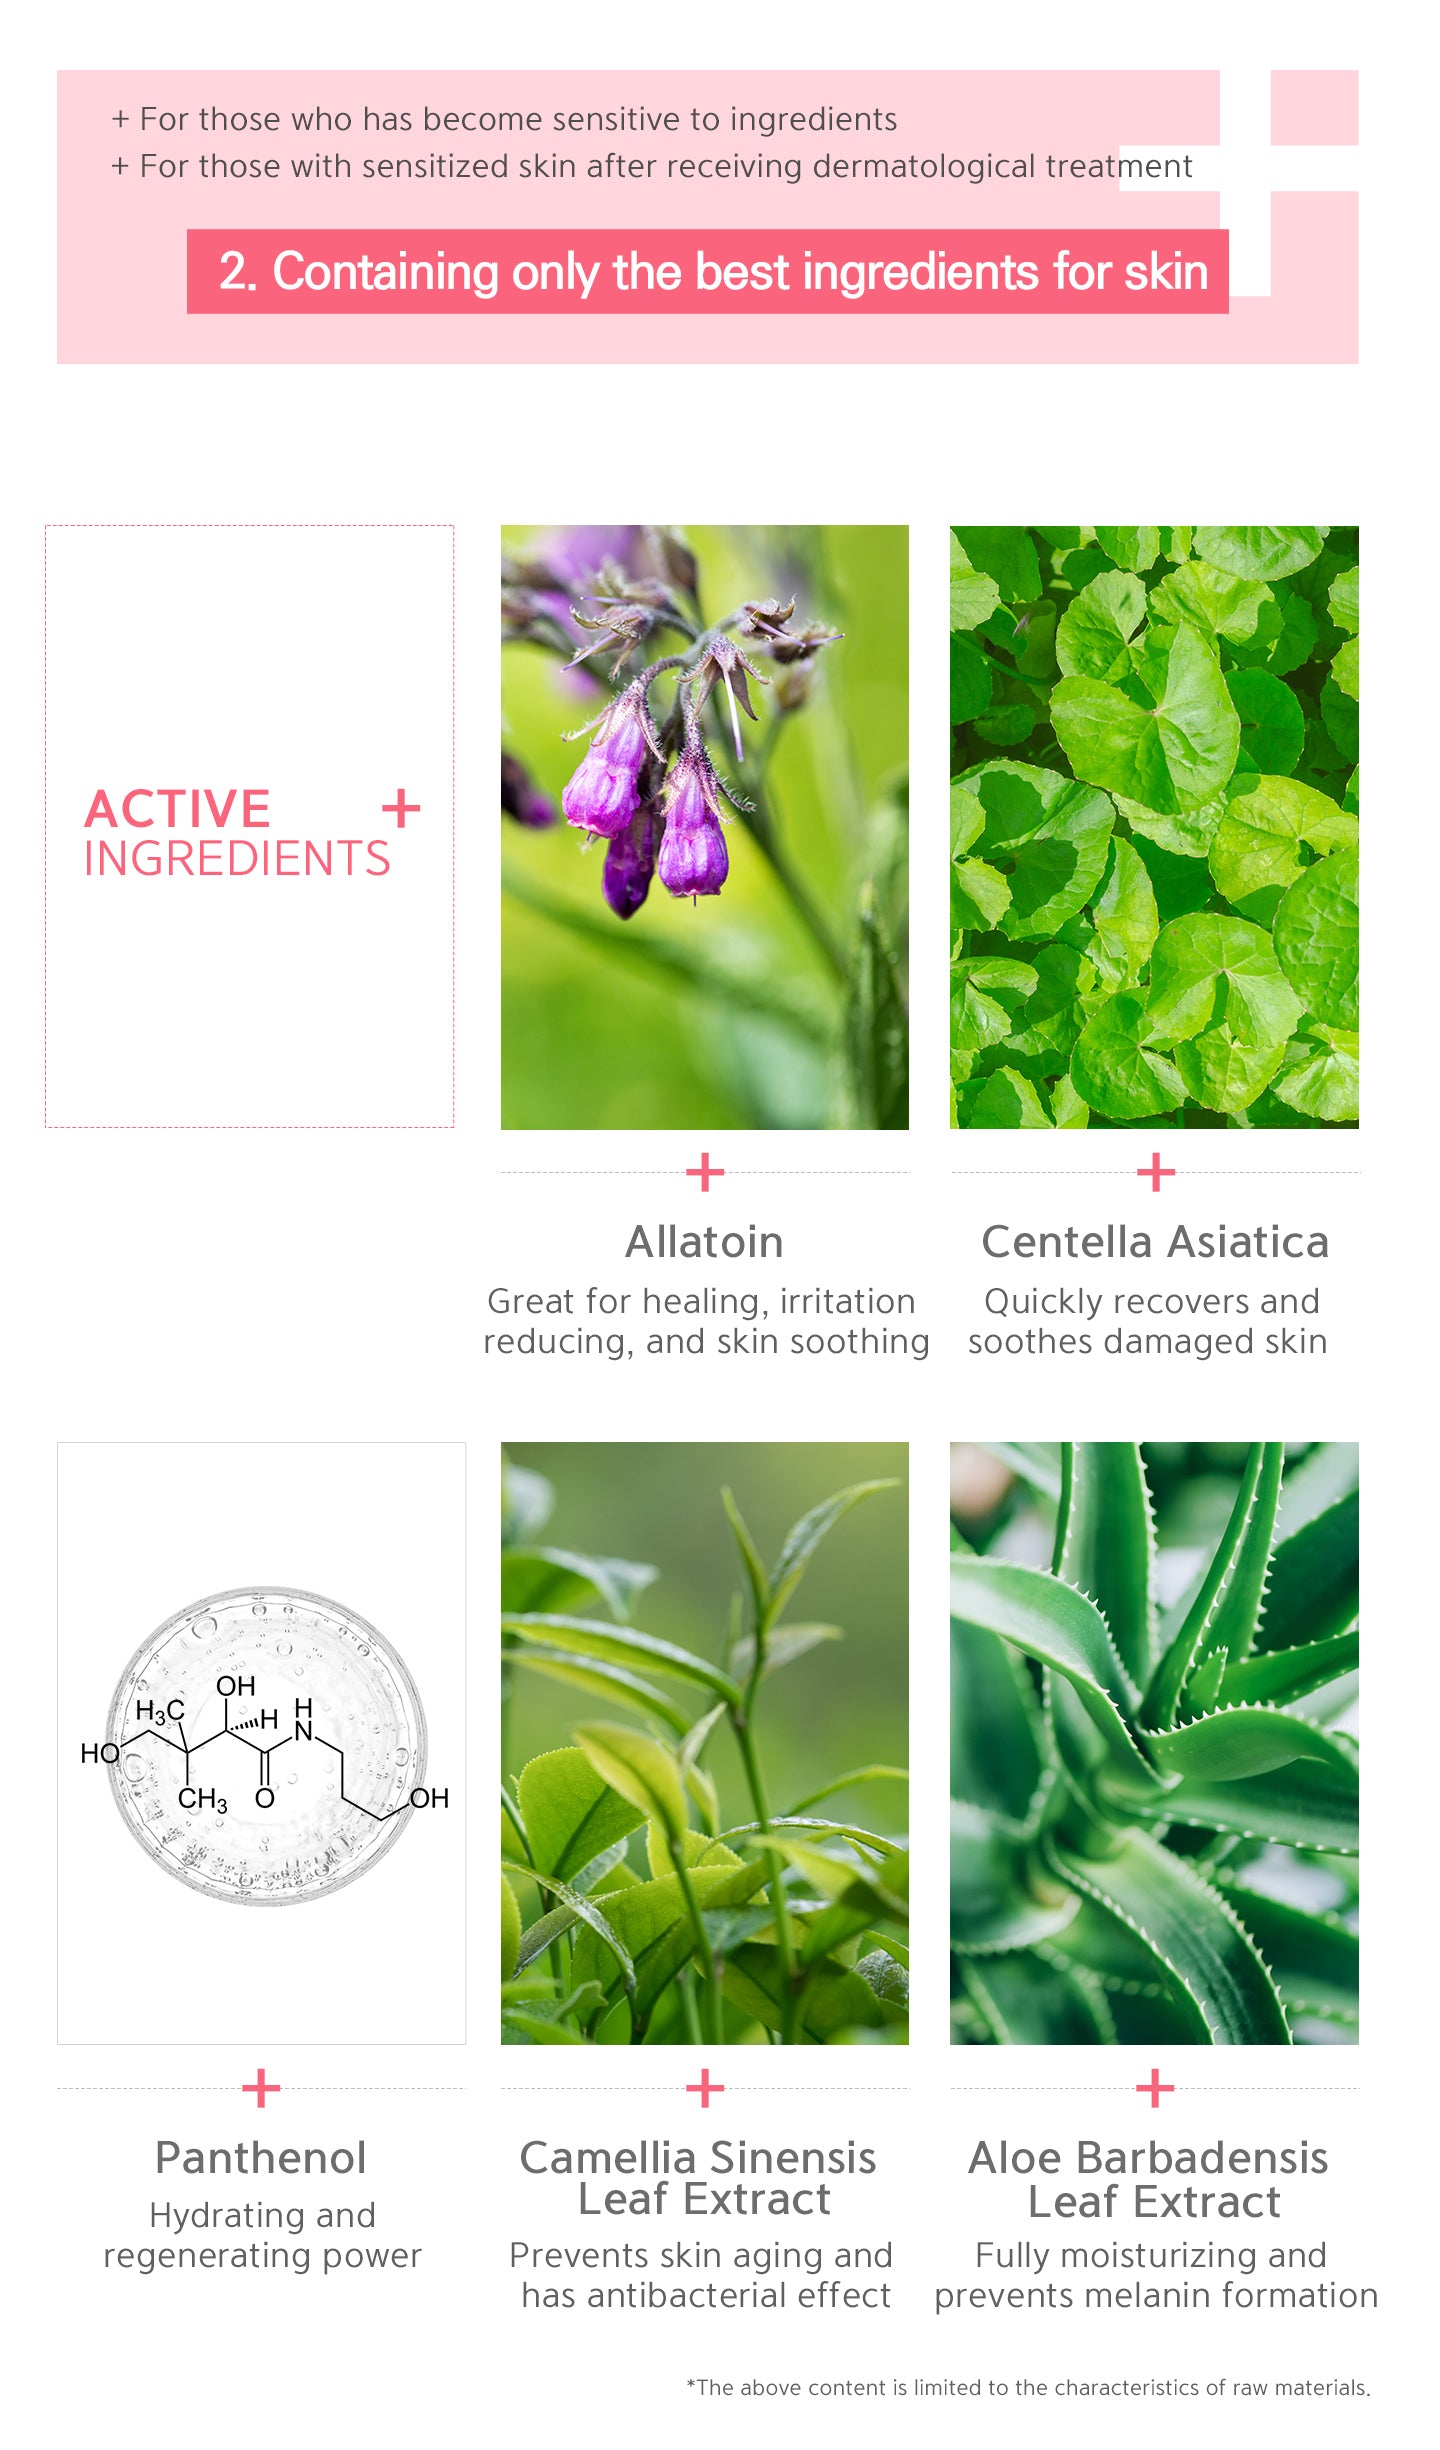 Active ingredients allatoin, centella asiatica, panthenol, camellia sinensis leaf extract and aloe barbadensis leaf extract. 